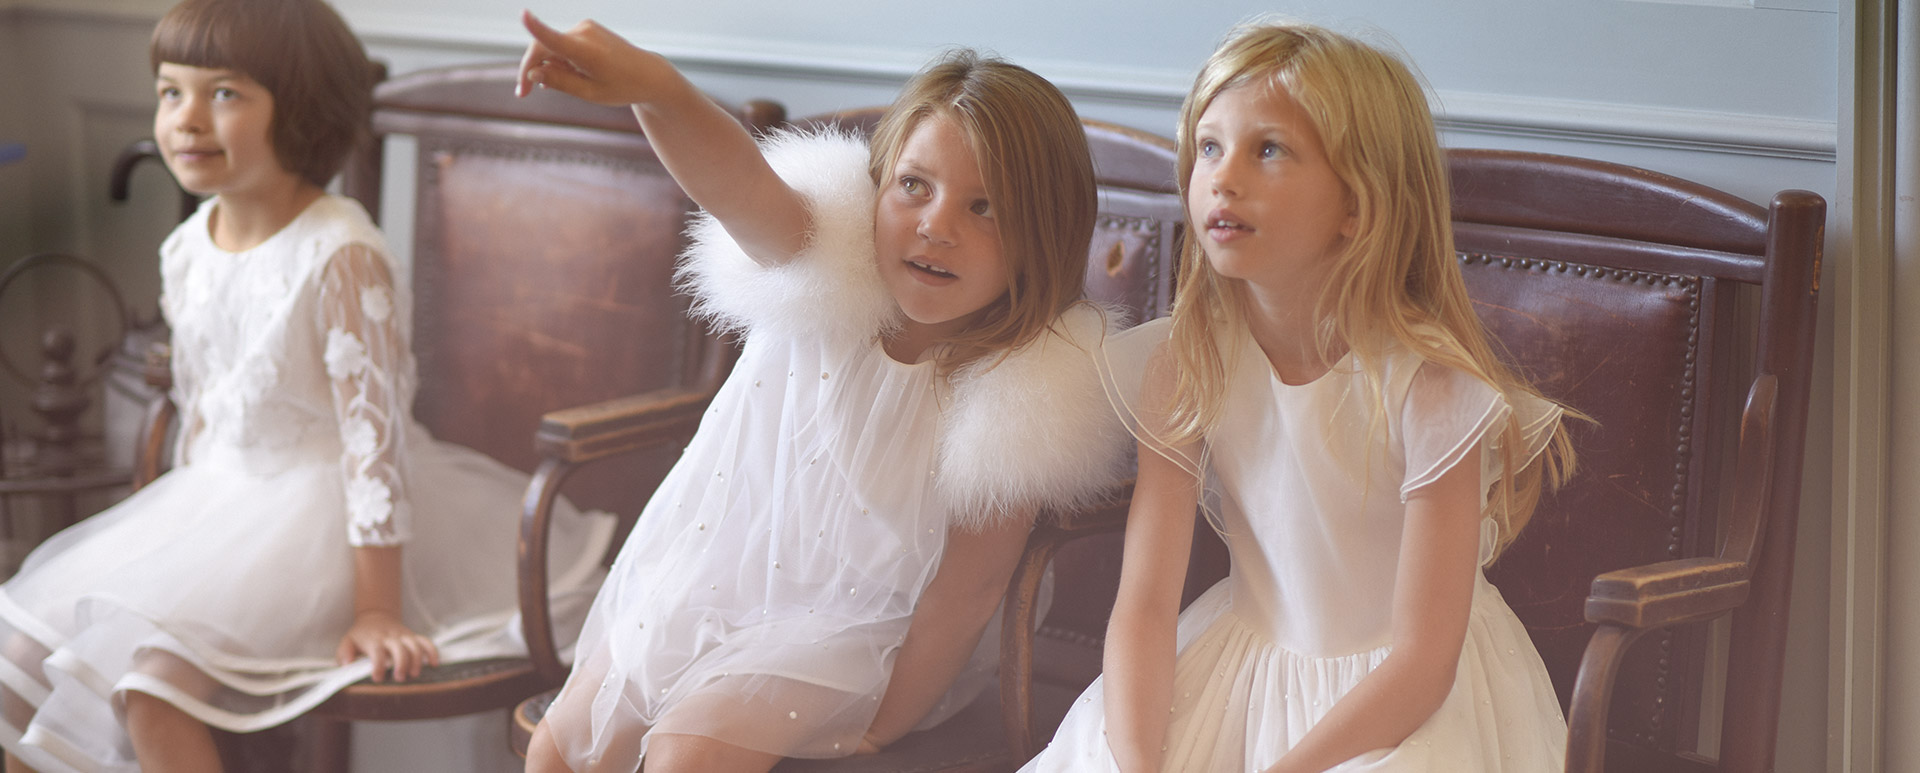 luxury children's clothing for girls from the brand Charabia